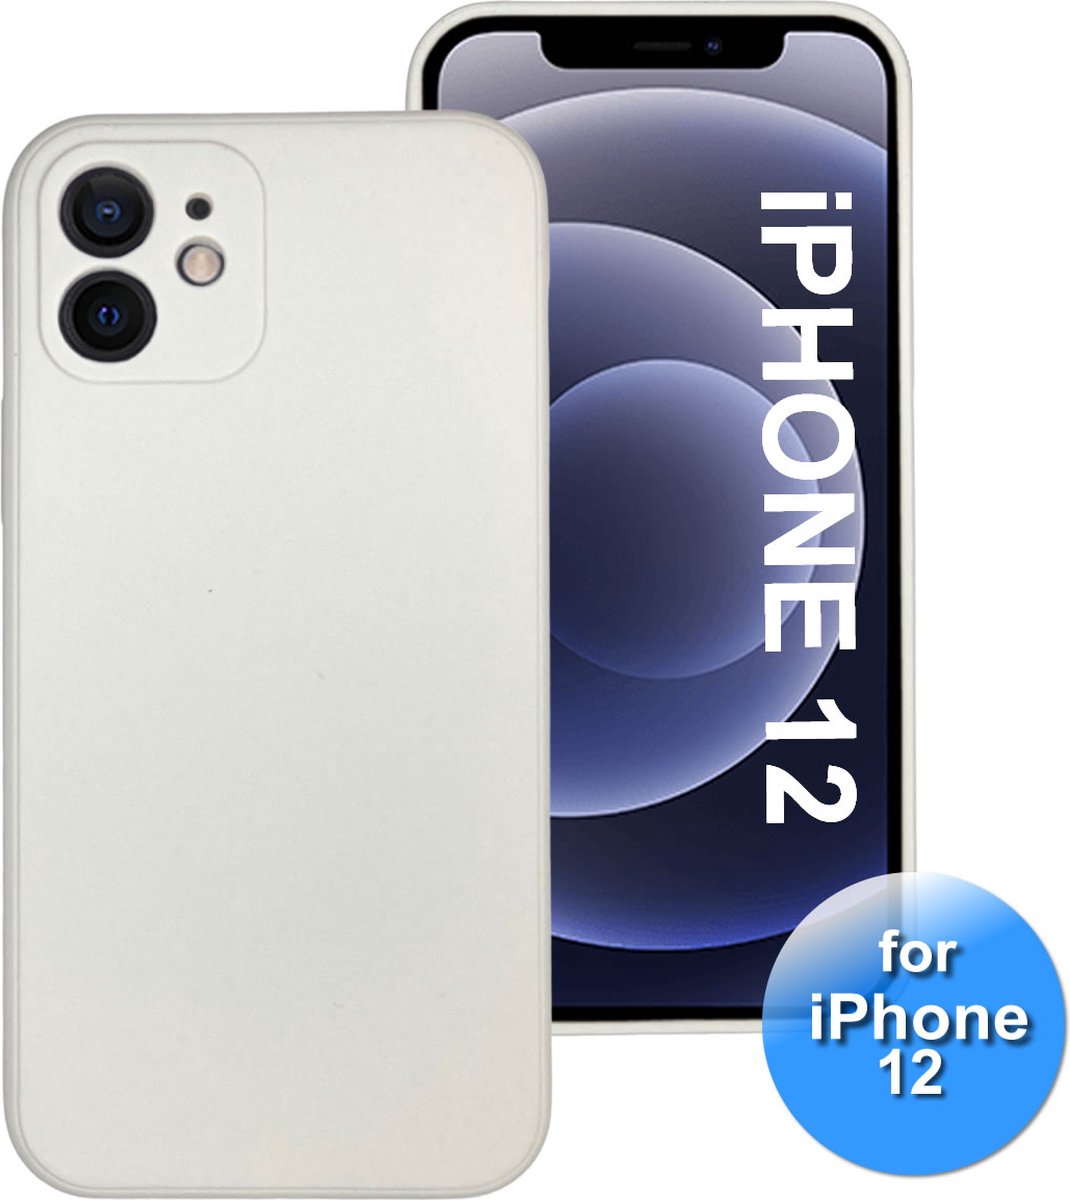 iPhone 12 Hoesje - Zacht Wit Siliconen - iPhone 12 Back Cover - iPhone 12 telefoonhoesje - Zacht Wit